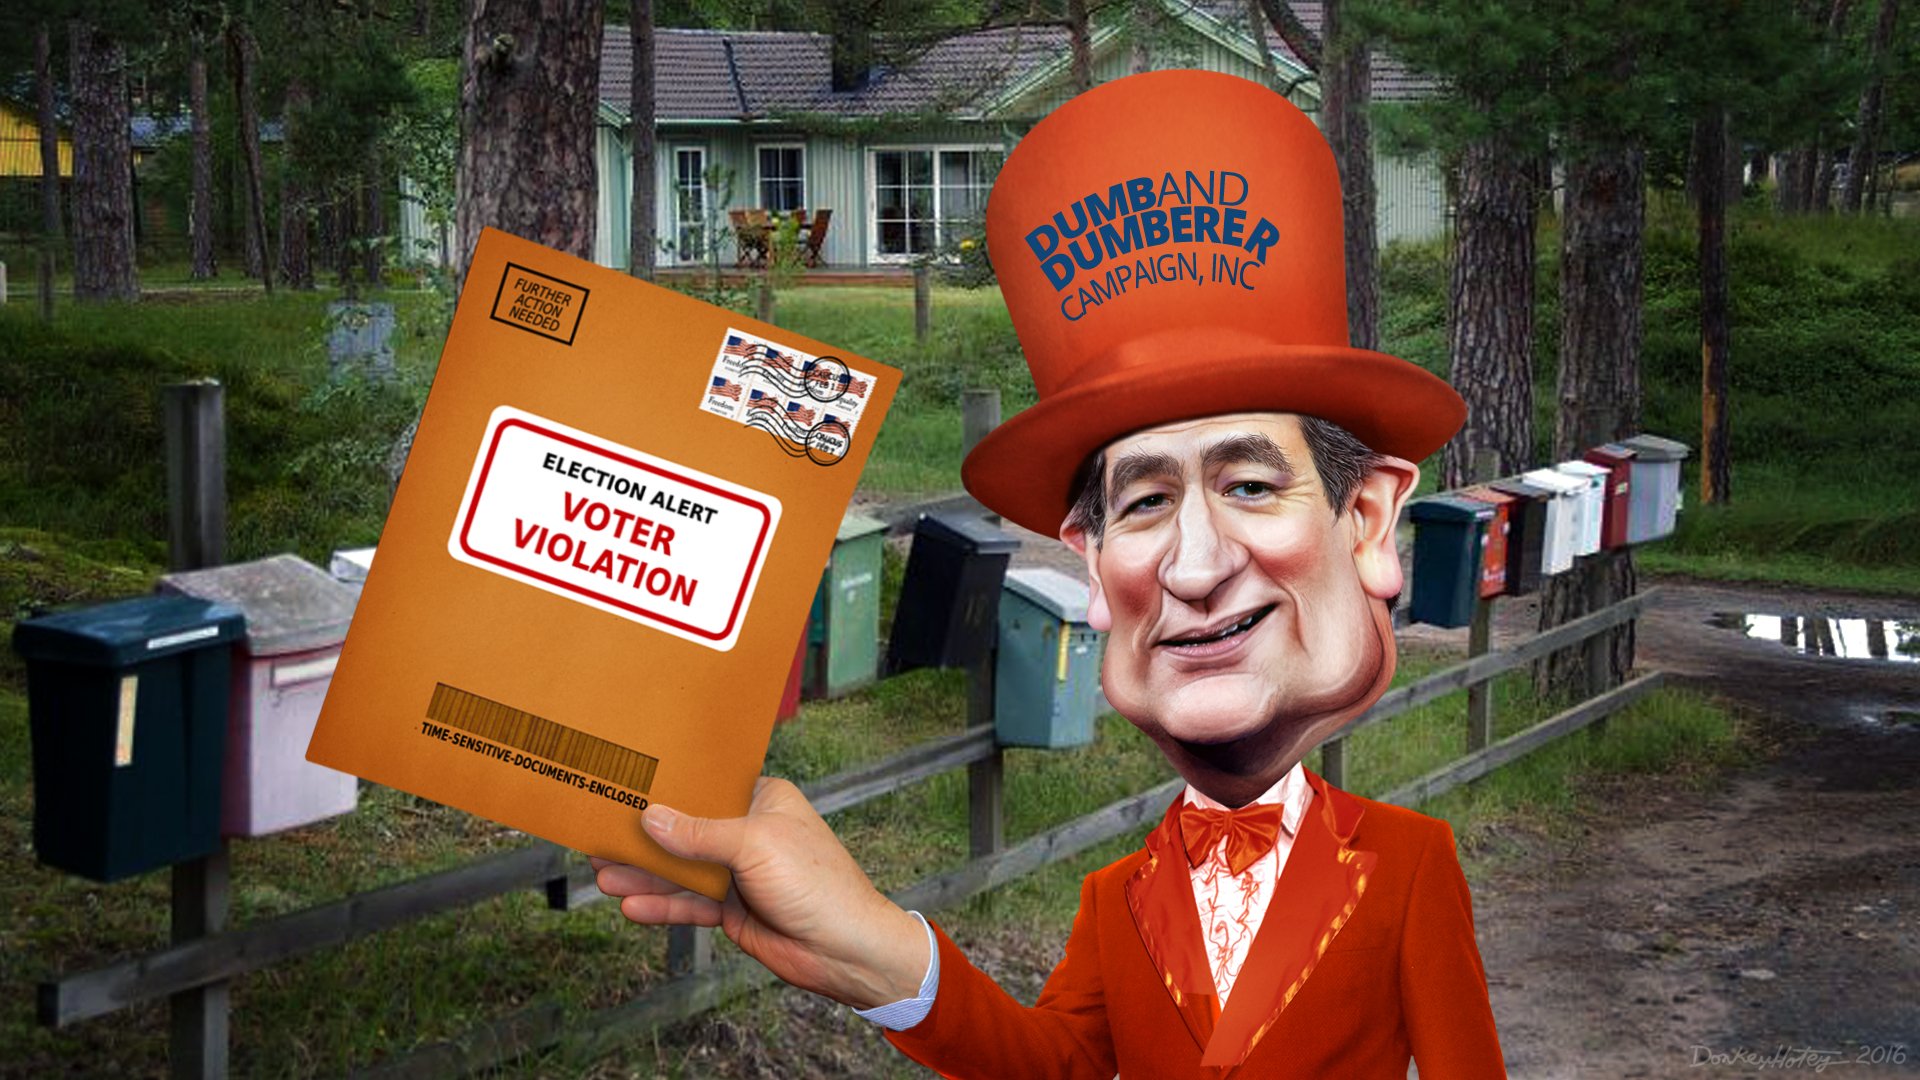 Ted_Cruzs_Dumb_And_Dumberer_Campaign_Mailer_1920x1080.jpg